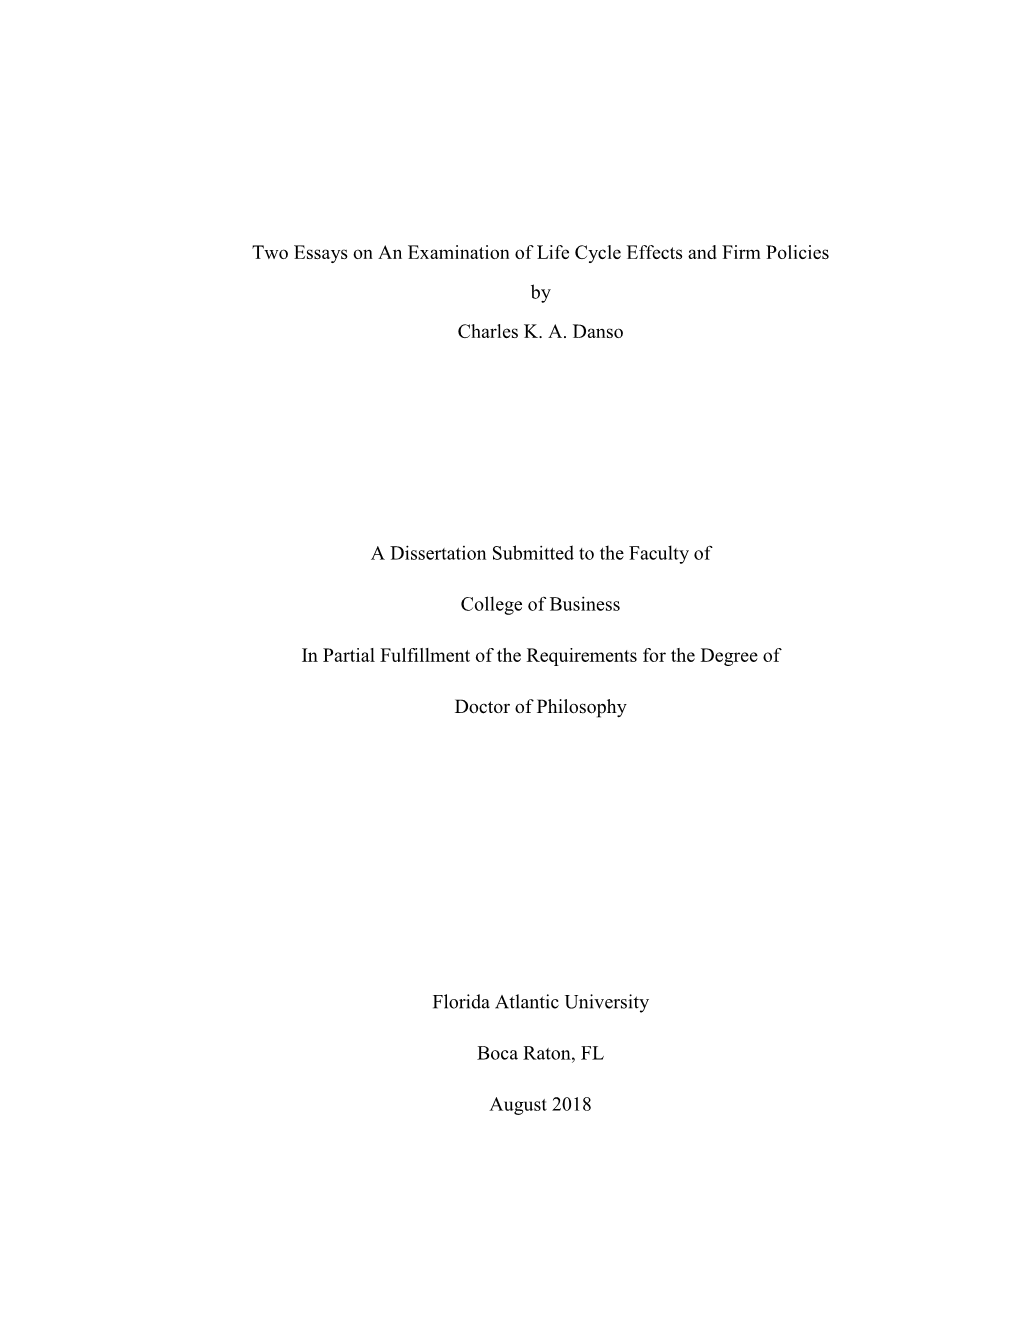 Two Essays on an Examination of Life Cycle Effects and Firm Policies by Charles K